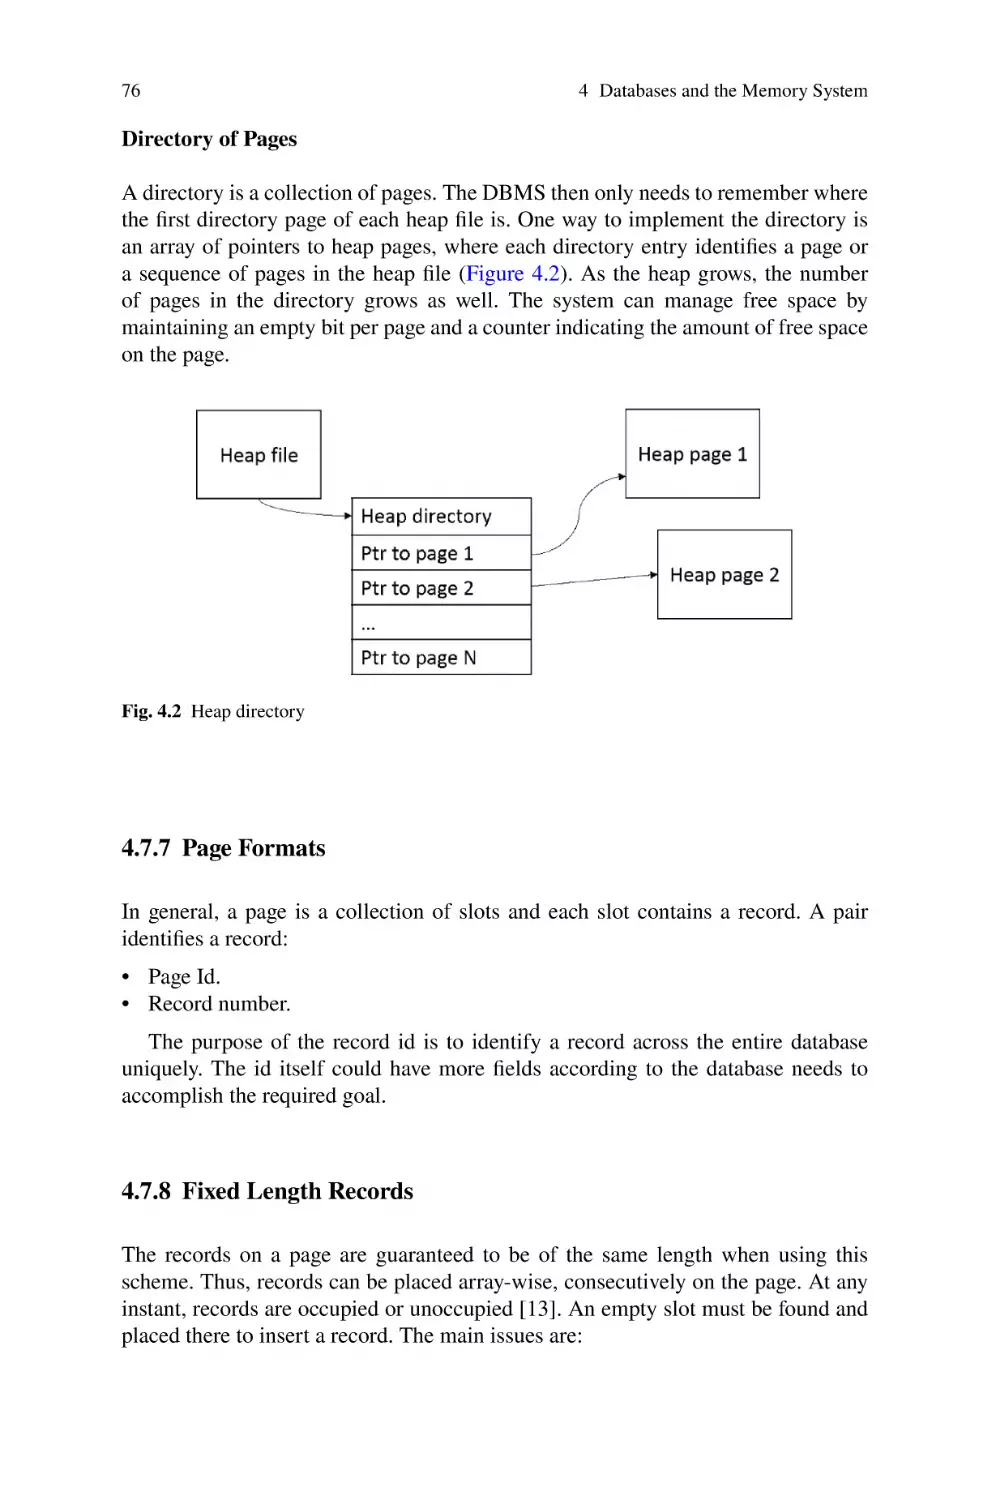 4.7.7 Page Formats
4.7.8 Fixed Length Records